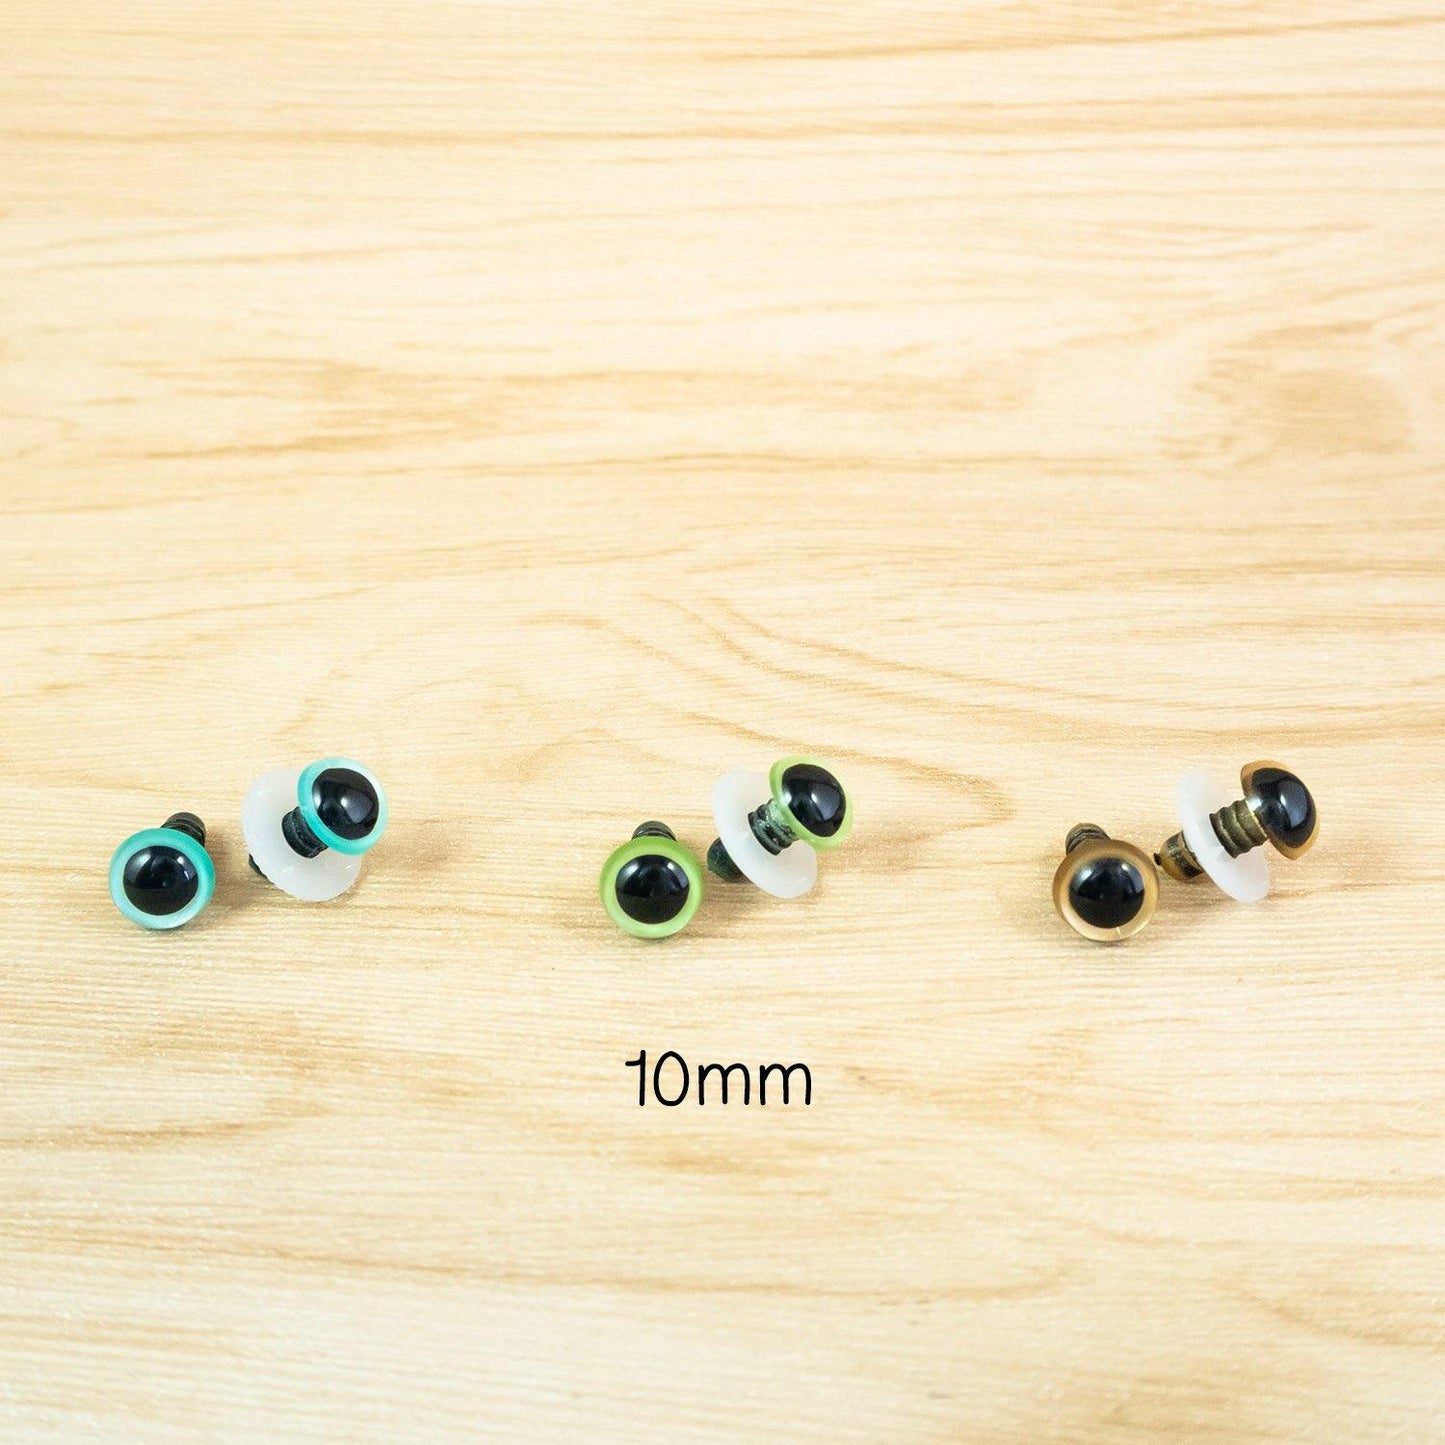 10mm pearl colour safey eyes for teddy bears - Pearl Blue, Pearl Green, Gold